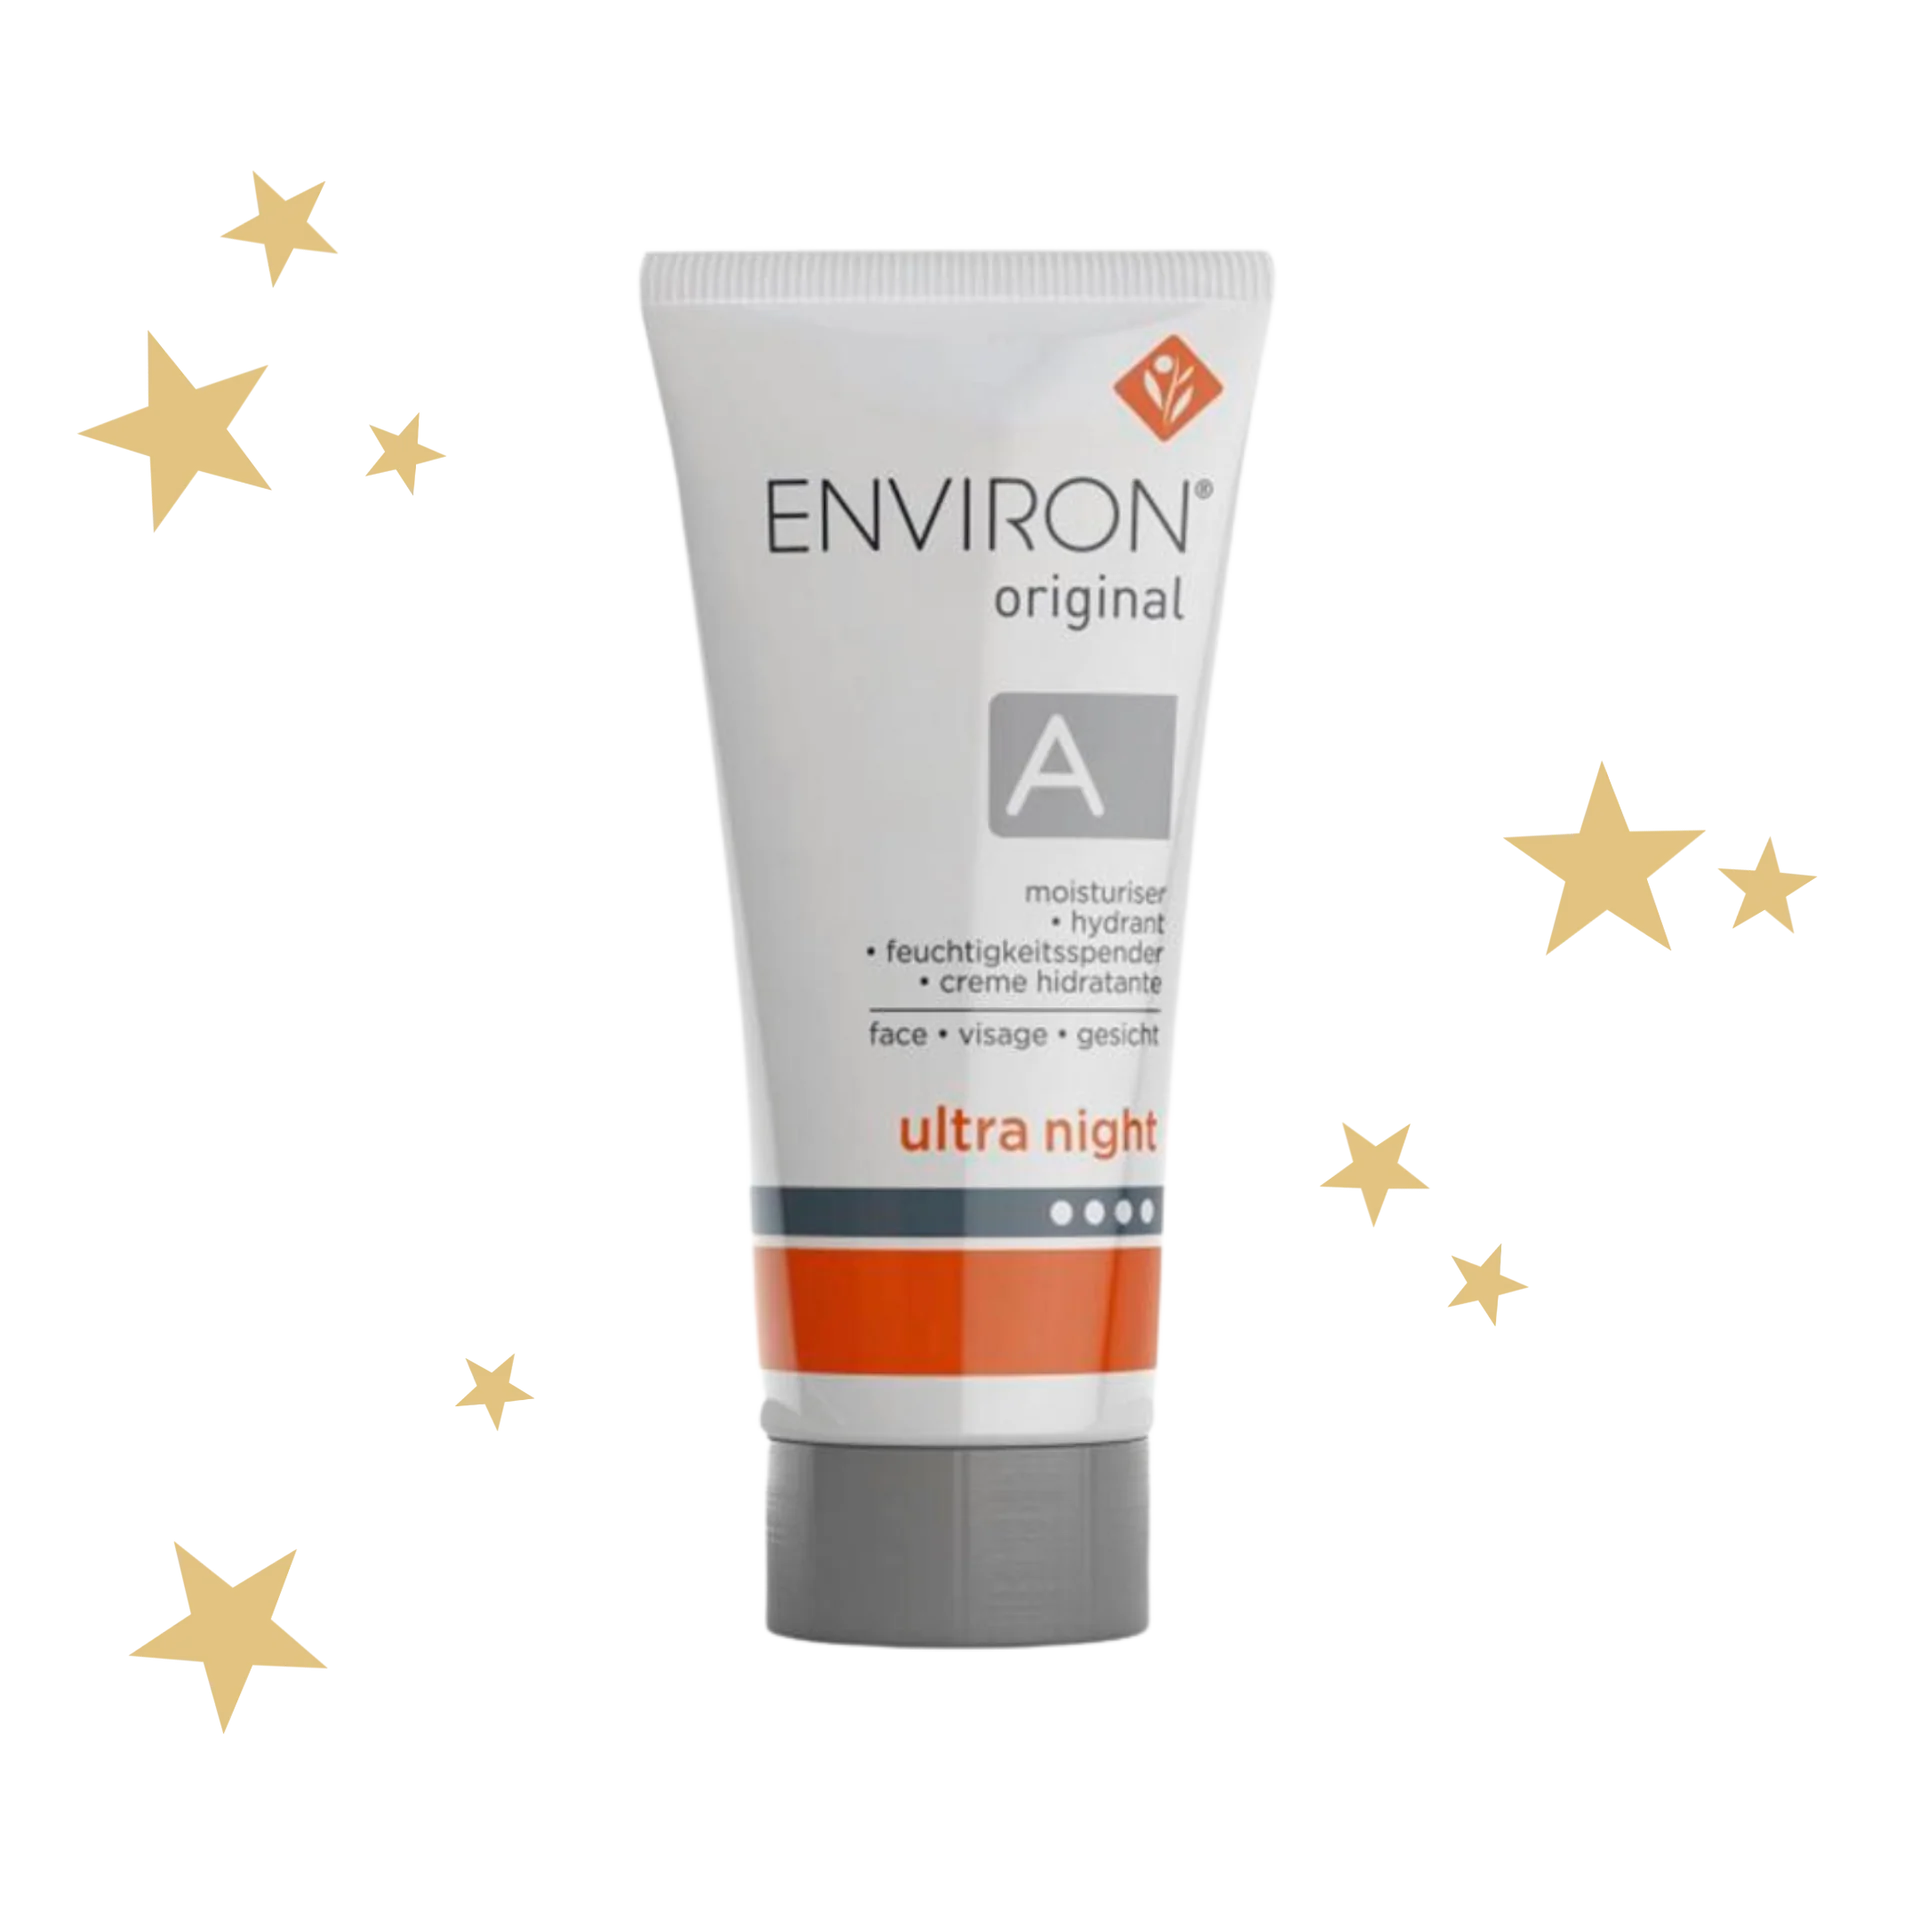 Environ Skin Care: Nourish Your Skin from Within with Essential Nutrients